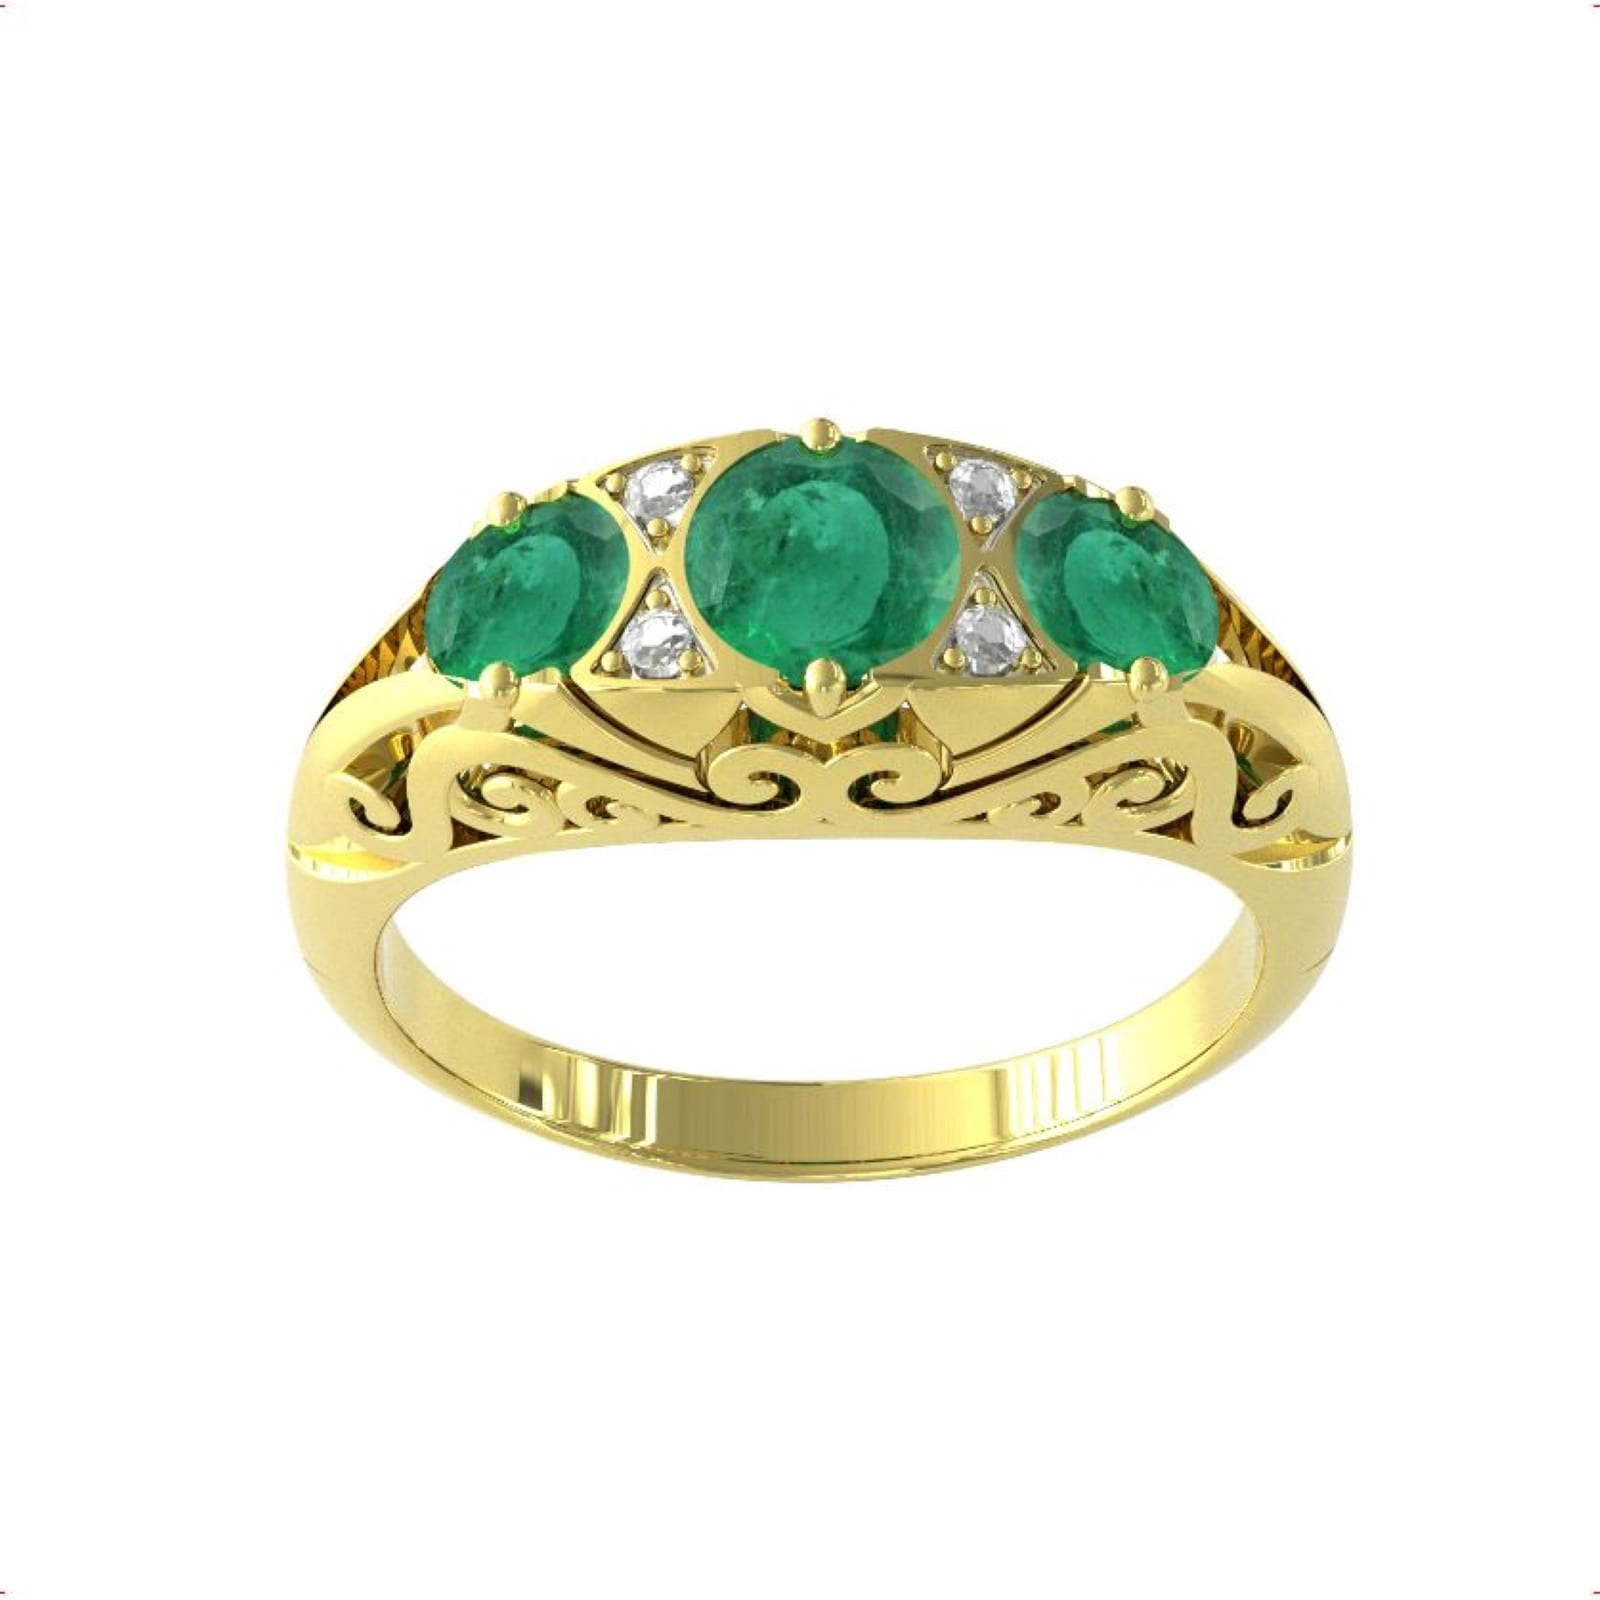 9ct Yellow Gold Victorian Style 3 Stone Emerald & Diamond Ring - Ring Size O